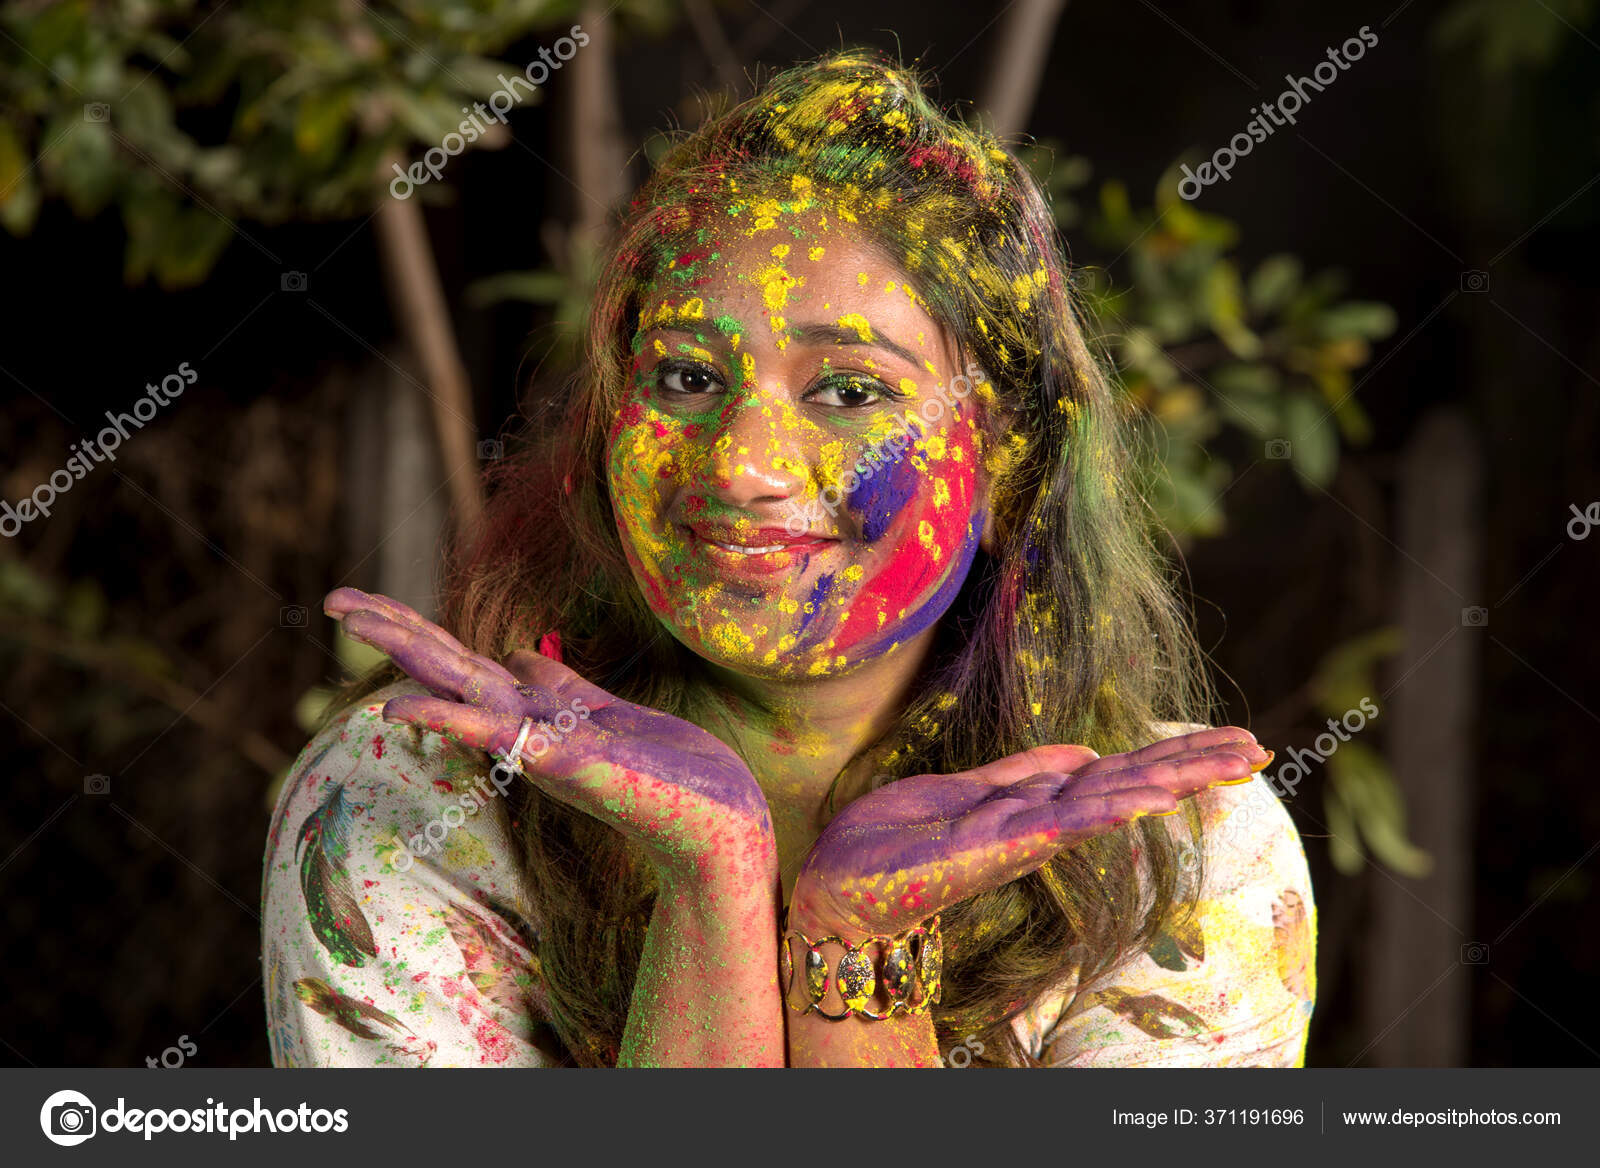 Holi Poses Photos and Images | Shutterstock